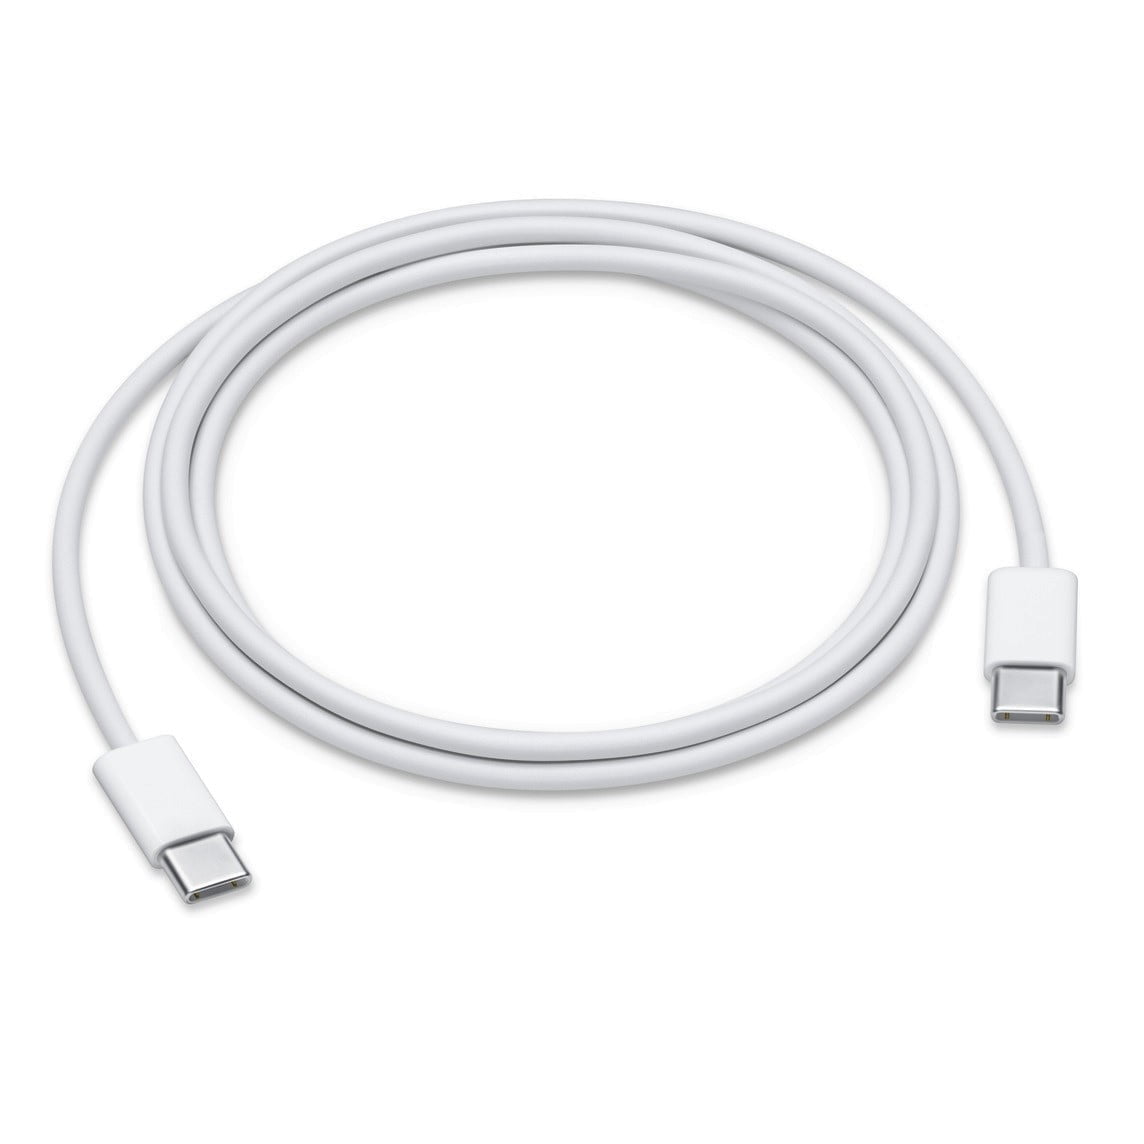 Muf72 Apple &Amp;Lt;H3 Class=&Amp;Quot;Heading-5 V-Fw-Regular Description-Heading&Amp;Quot;&Amp;Gt;Apple Usb-C Charge Cable 1M - White&Amp;Lt;/H3&Amp;Gt; This 1-Meter Charge Cable - With Usb-C Connectors On Both Ends - Is Ideal For Charging Usb-C Devices, And Also Supports Usb 2 For Syncing And Data Transfer Between Usb-C Devices. To Conveniently Charge Your Macbook, Macbook Air, Or Macbook Pro From A Wall Outlet, Pair The Usb-C Charge Cable With A Compatible Usb-C Power Adapter, Sold Separately Apple Usb C Charge Cable Apple Usb-C Charge Cable 1M - White